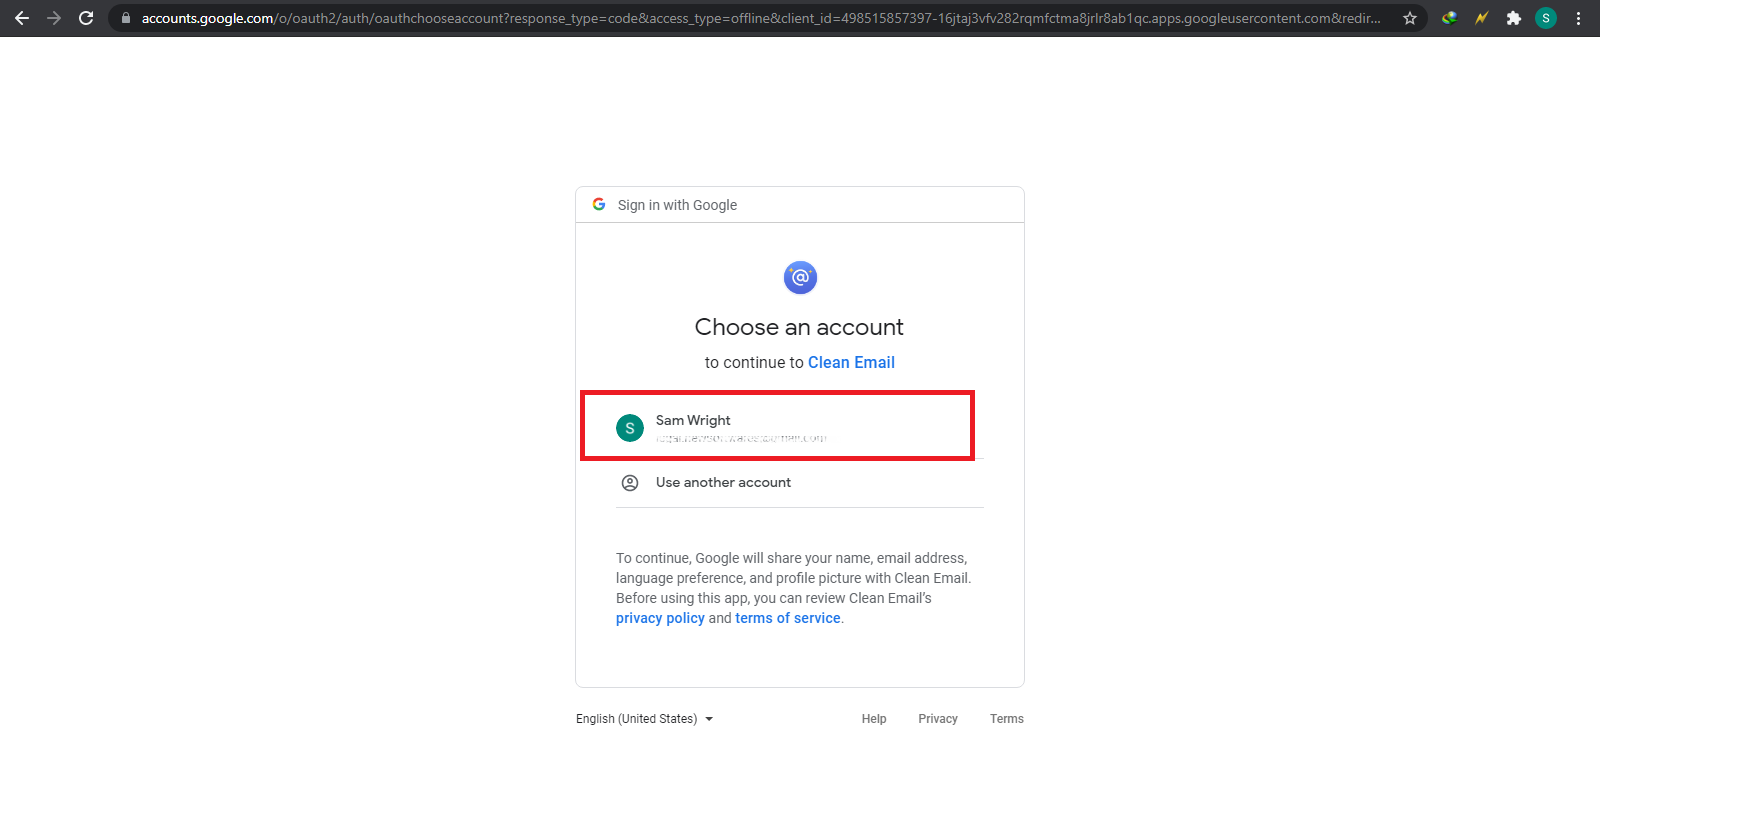 Your Google account